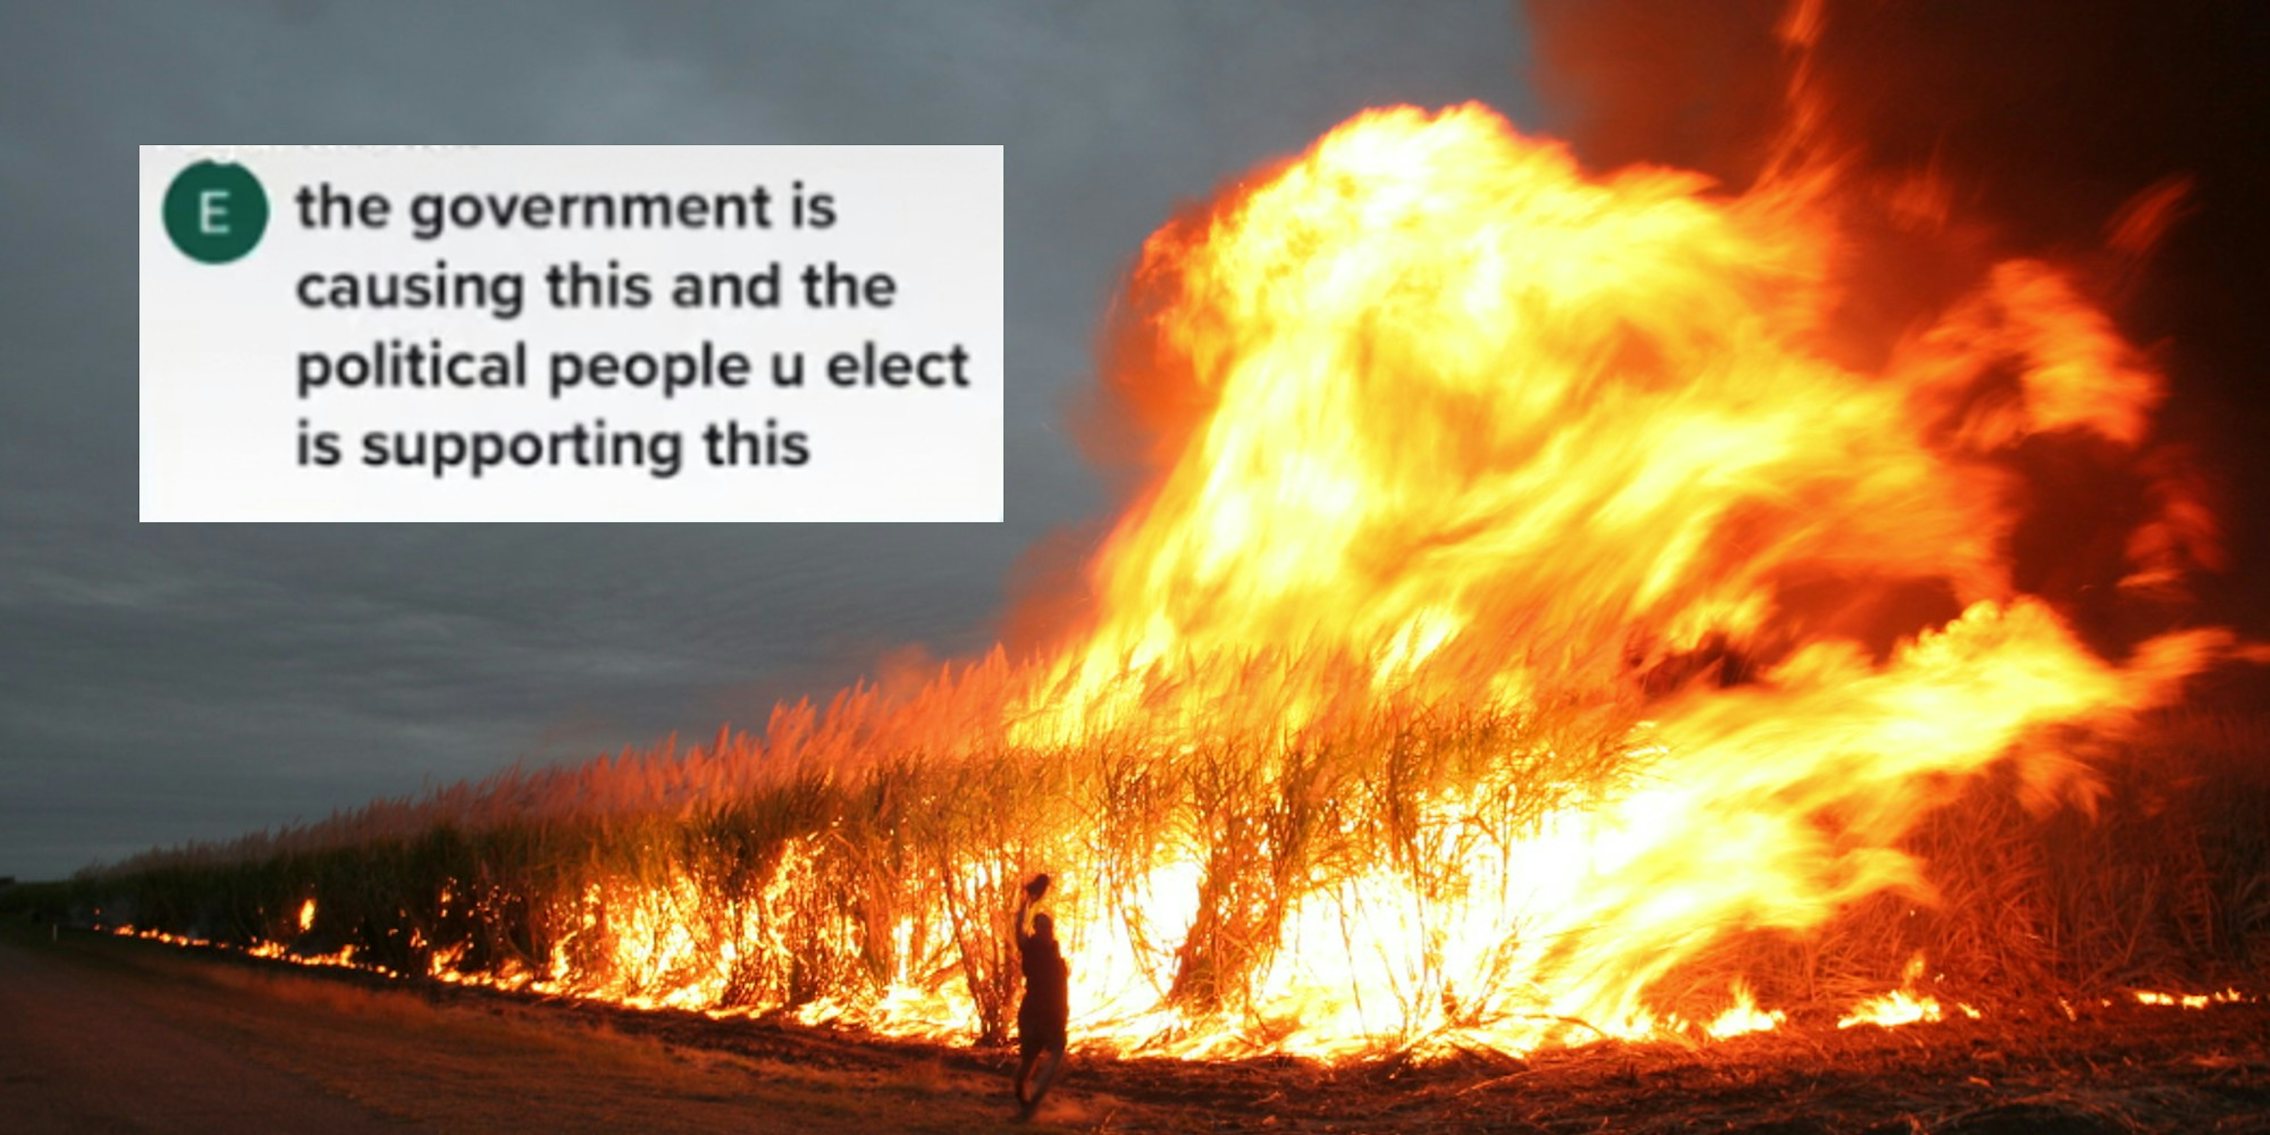 A large fire in a crop field next to a comment blaming the governmentRob and Stephanie Levy